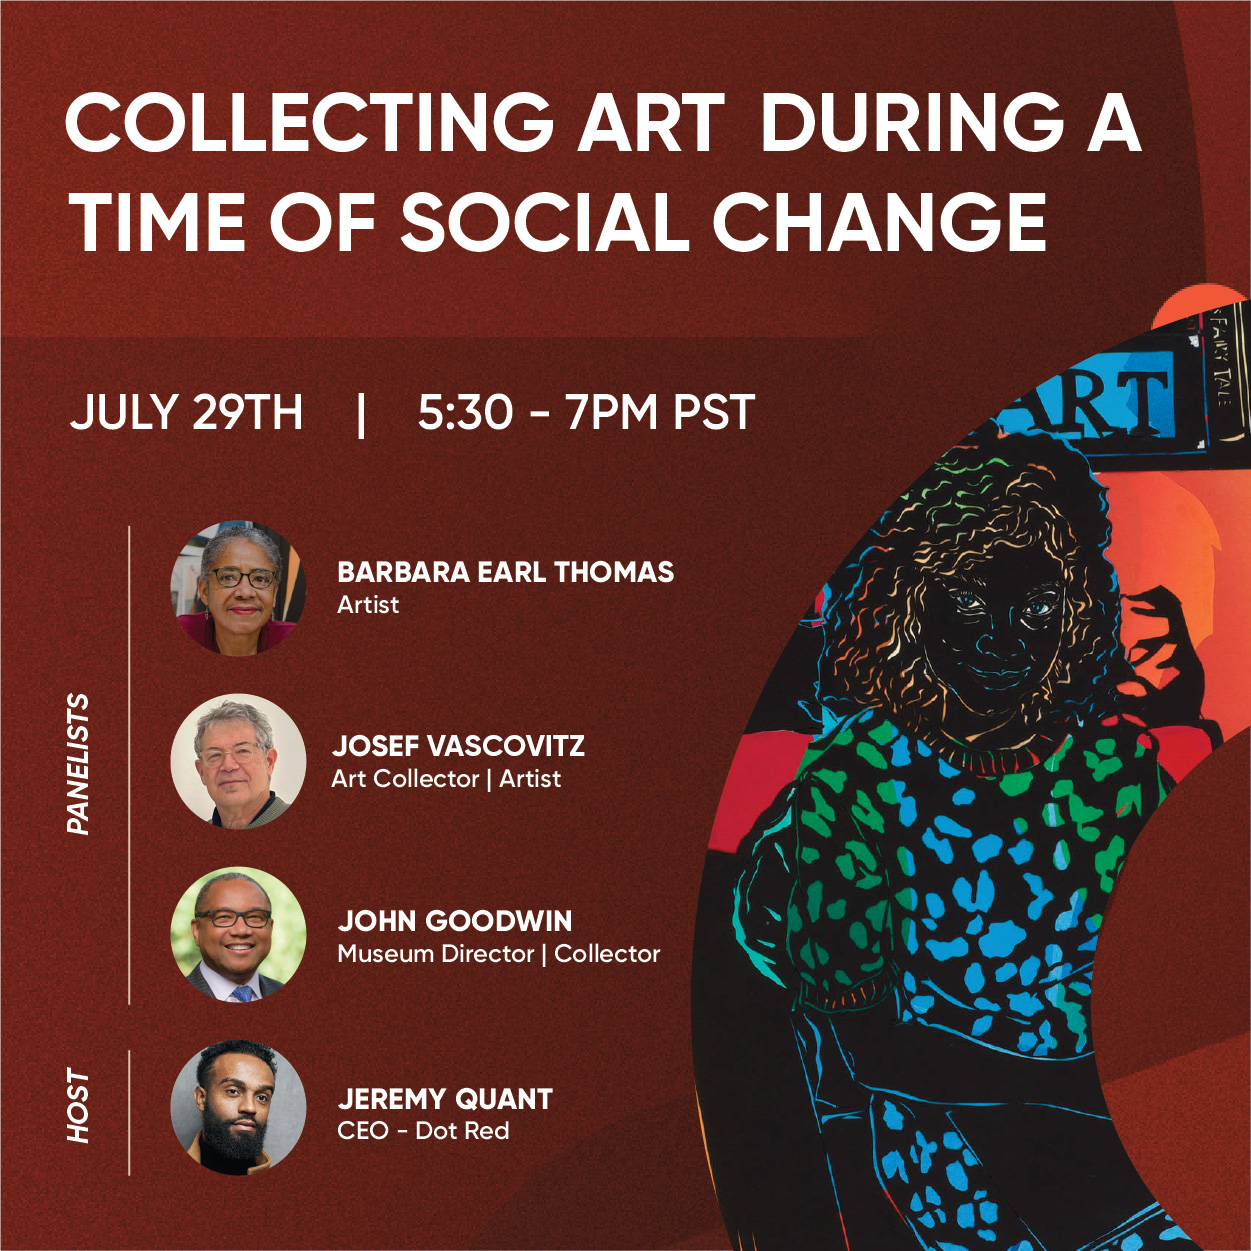 Collecting Art During a Time of Social Change